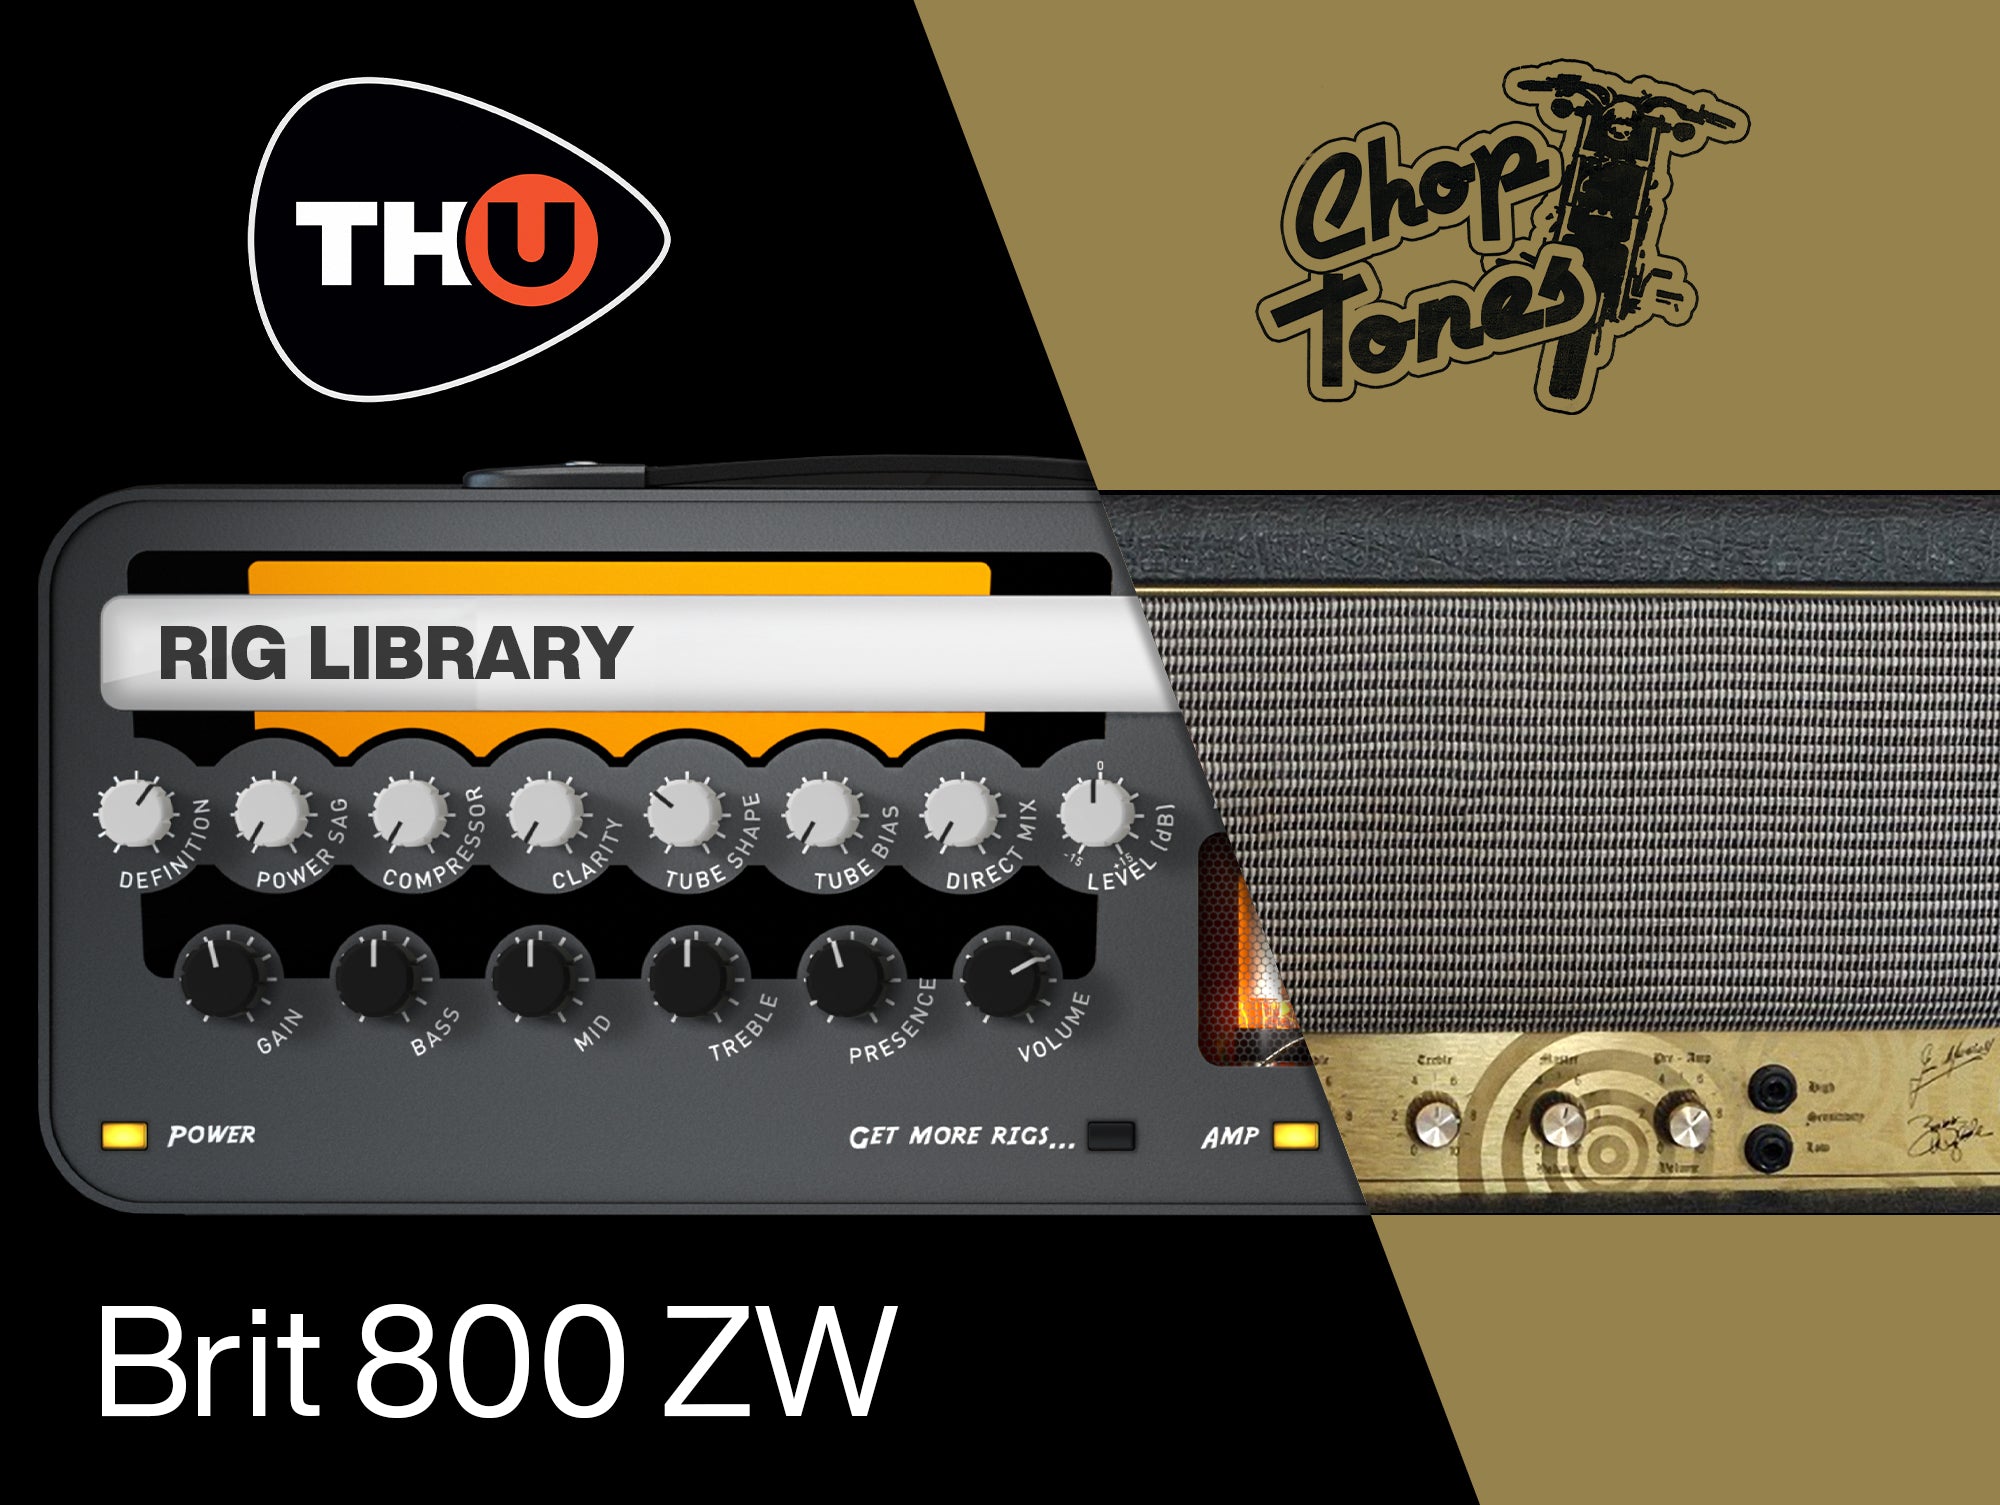 Overloud Brit 800 ZW - Rig Library for TH-U